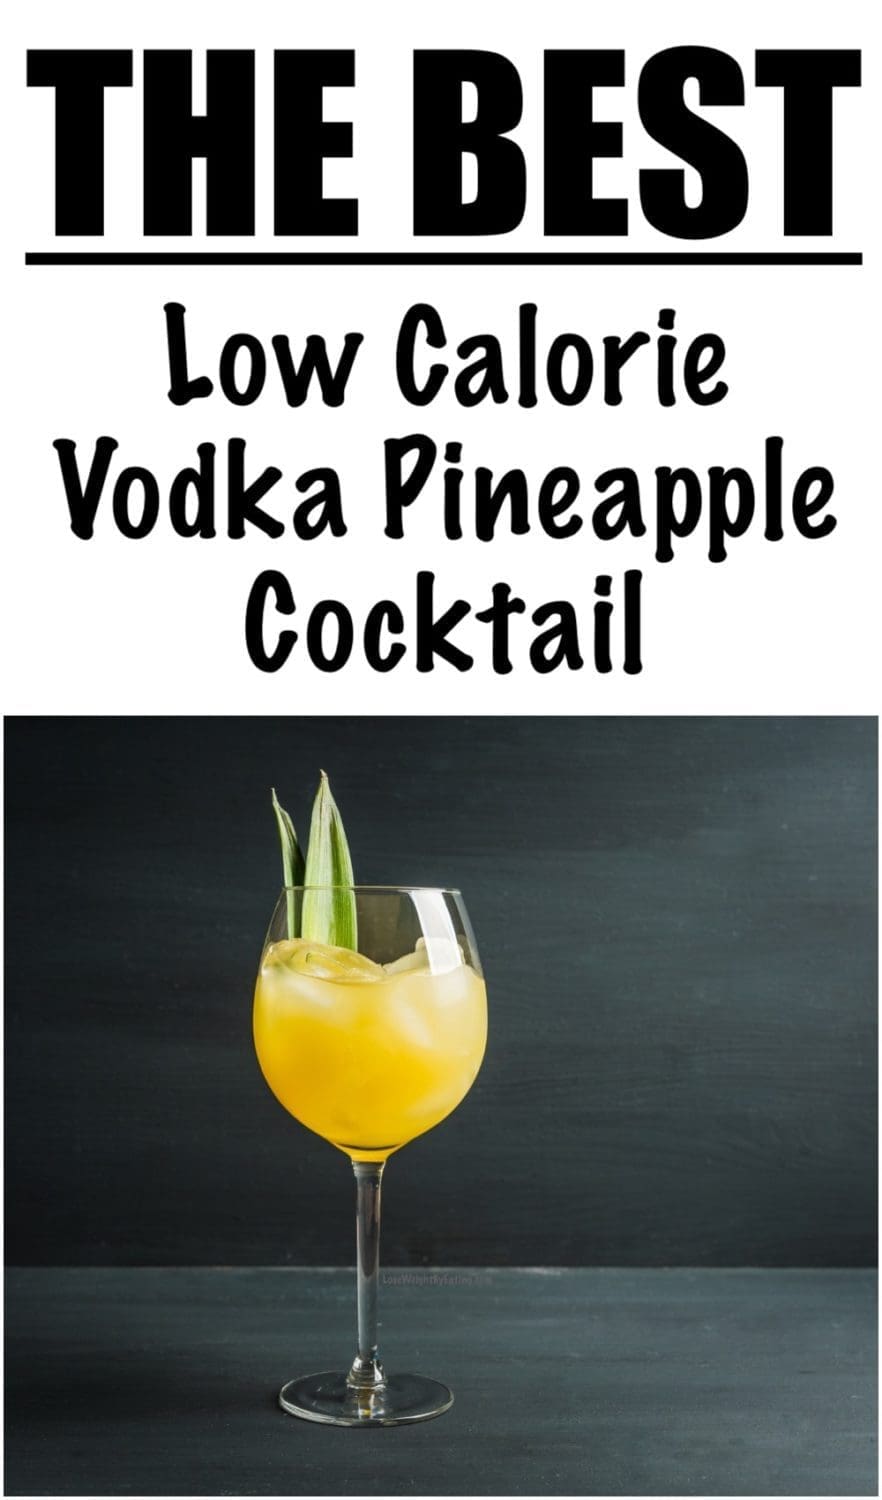 Pineapple Juice and Vodka Cocktail